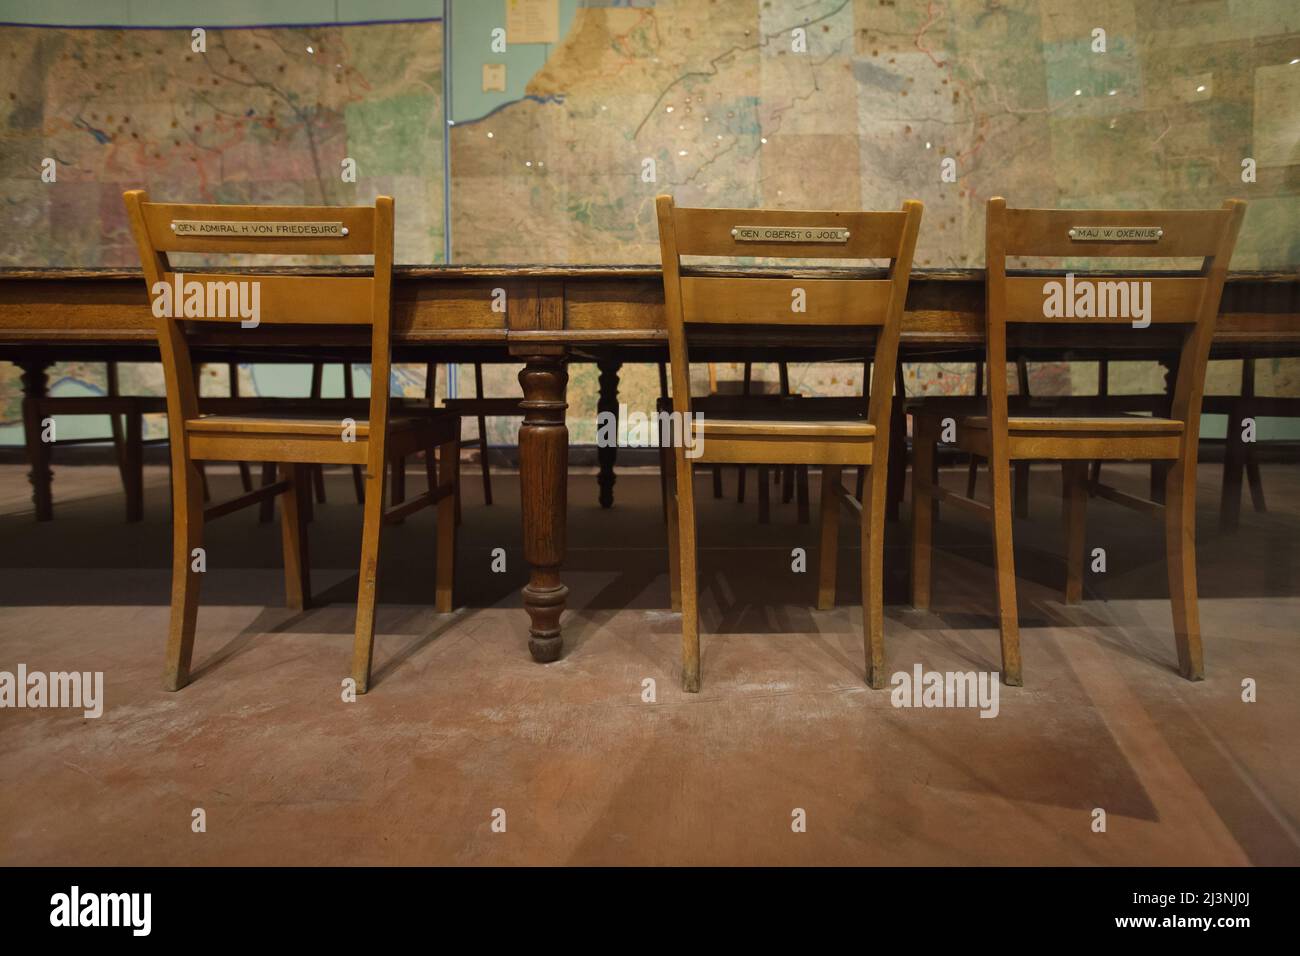 Chairs of the members of the German delegation in the Map Room also known as the War Room of the Supreme Headquarters Allied Expeditionary Force (SHAEF) in Reims, France. The first German Instrument of Surrender that ended World War II in Europe was signed in this room at 02:41 Central European Time (CET) on 7 May 1945. The historical room is served now as a part of the Museum of the Surrender (Musée de la Reddition). The chairs of Admiral Hans-Georg von Friedeburg, General Alfred Jodl and Major Wilhelm Oxenius are pictured from left to right. General Alfred Jodl served as the Chief of the Ope Stock Photo